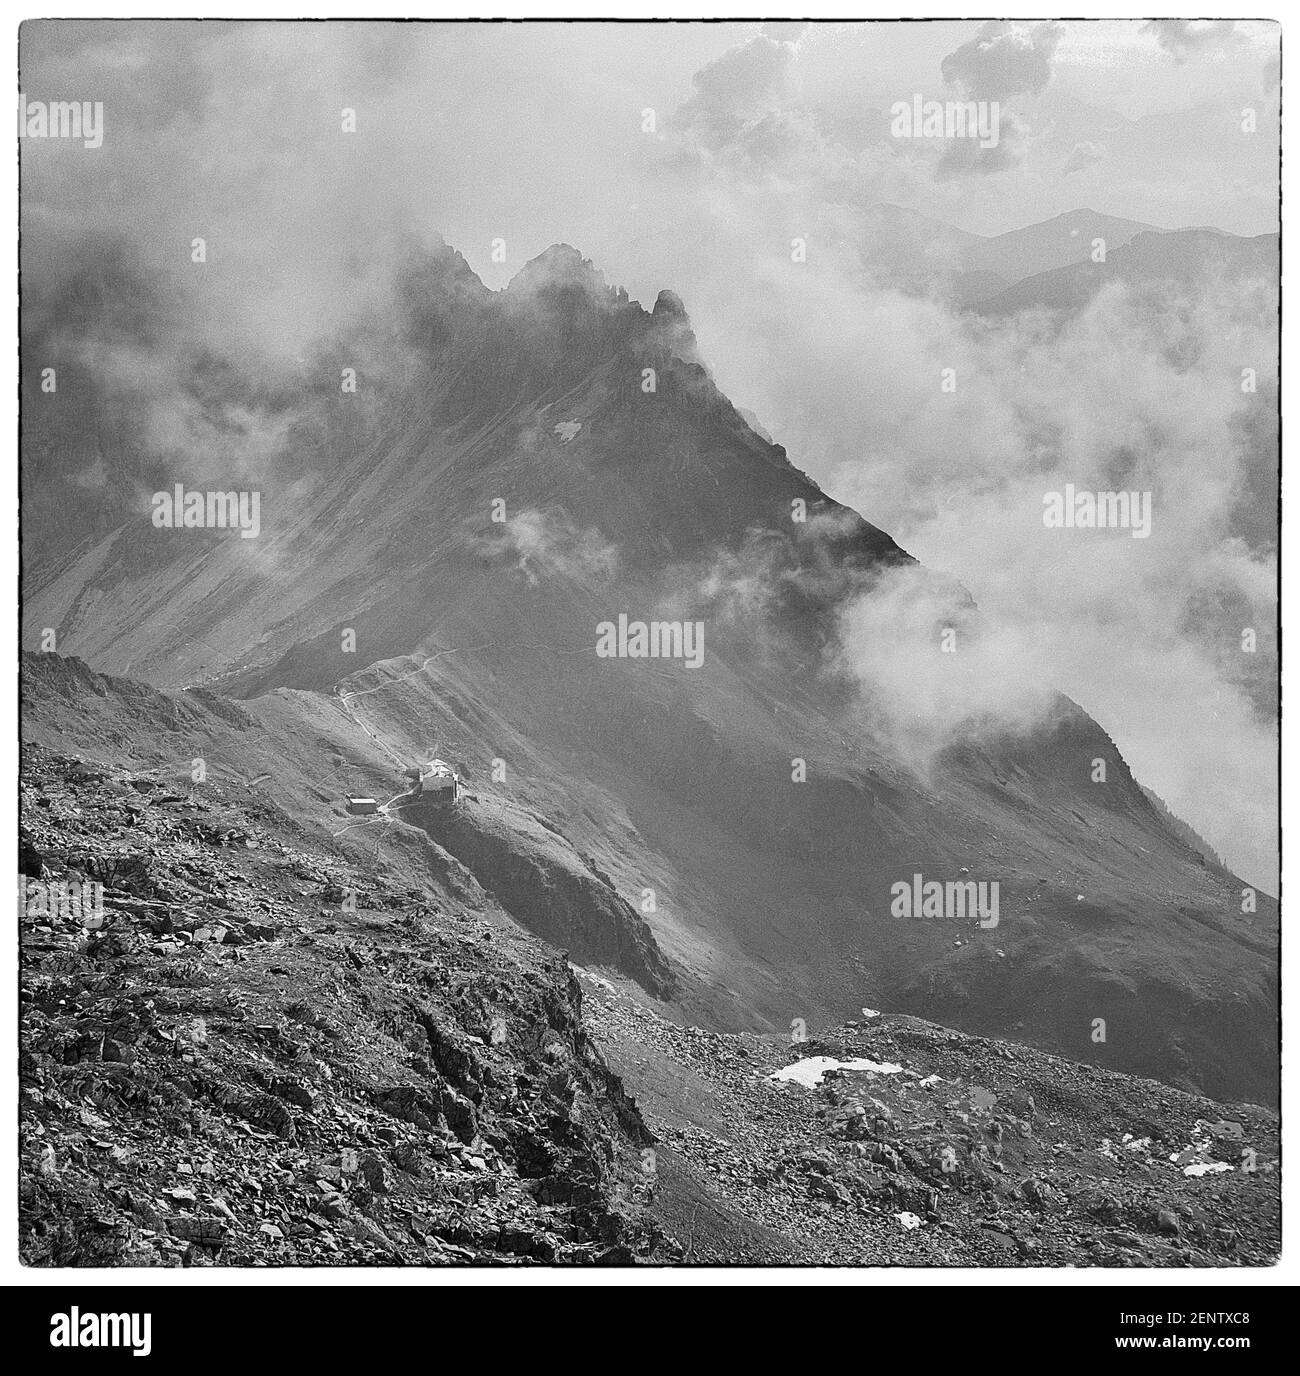 Austria, Tyrol. This set of images is of the Stubai Alps in the Stubaital valley near the resort towns of Fulpmes and Neustift in the Austrian Tyrol not far from the city of Innsbruck as they where in 1968. The image here is of the Austrian Alpine Club, OeAV, Innsbrucker mountain Hut refuge, named after the Austrian city of Innsbruck looking towards the mountains of the Serleskamm. Stock Photo